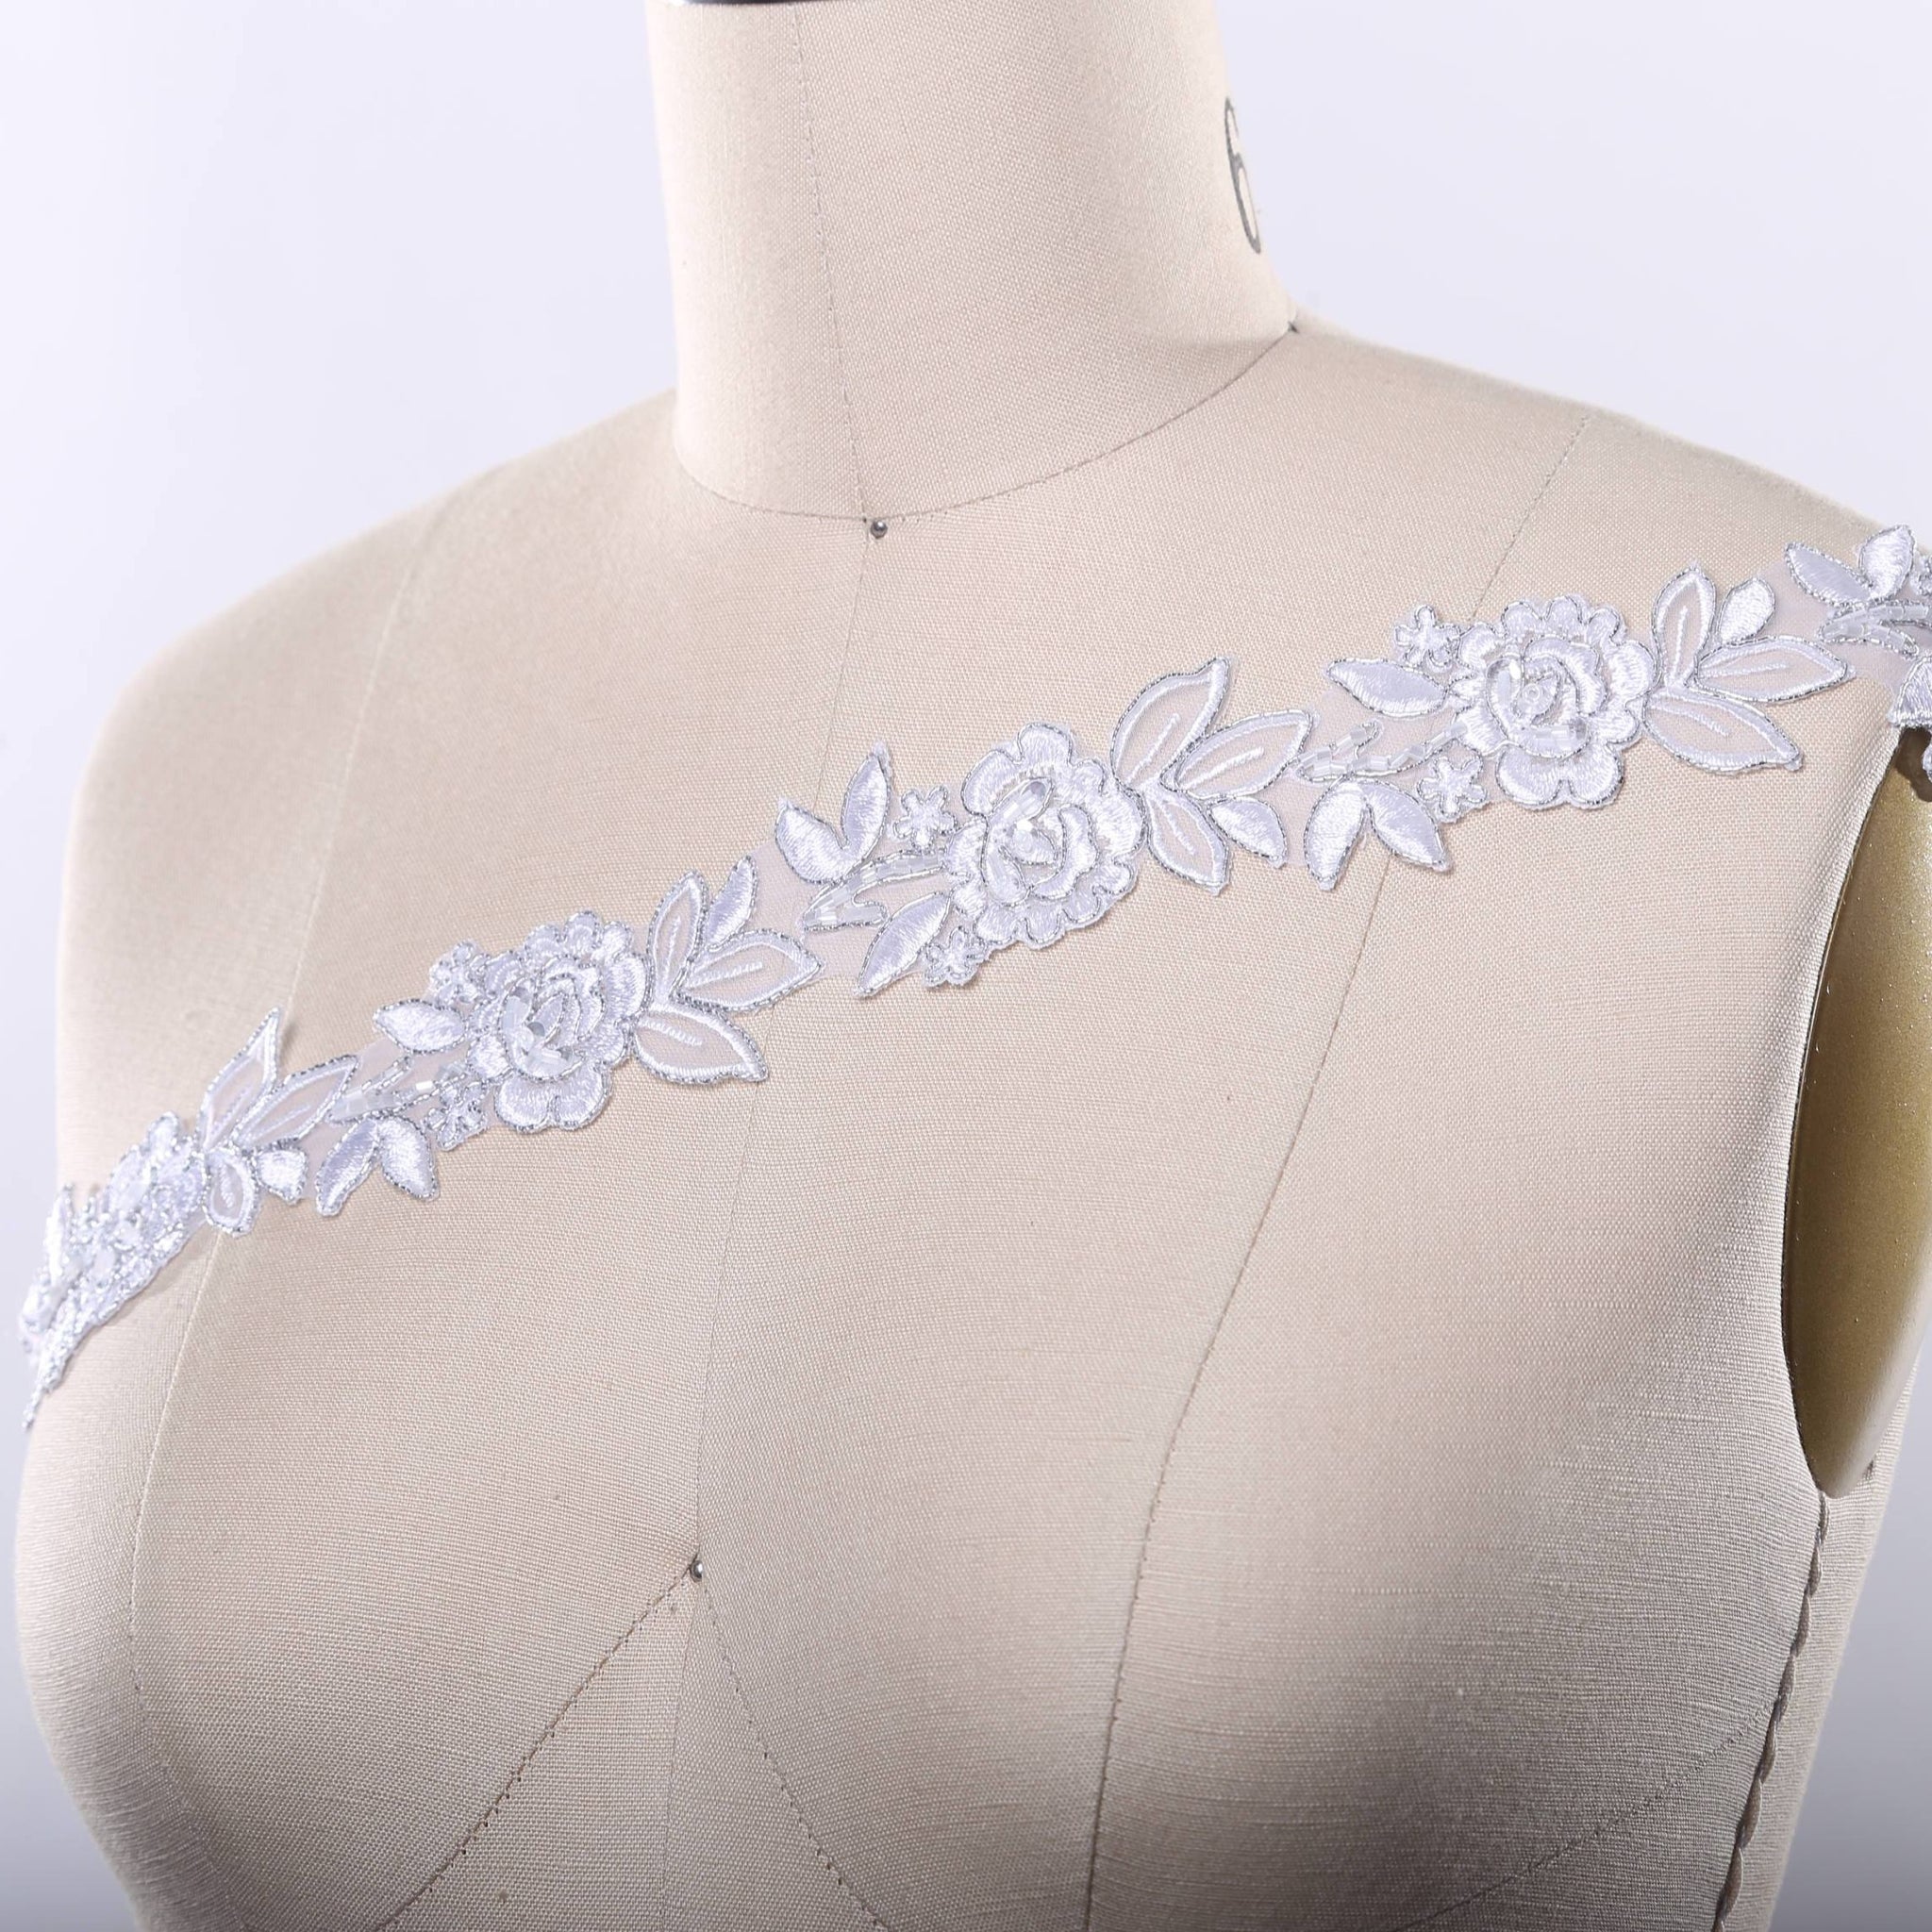 1 Yard 1.5" White and Silver Rose Bridal Lace Embellished with Beaded Trim